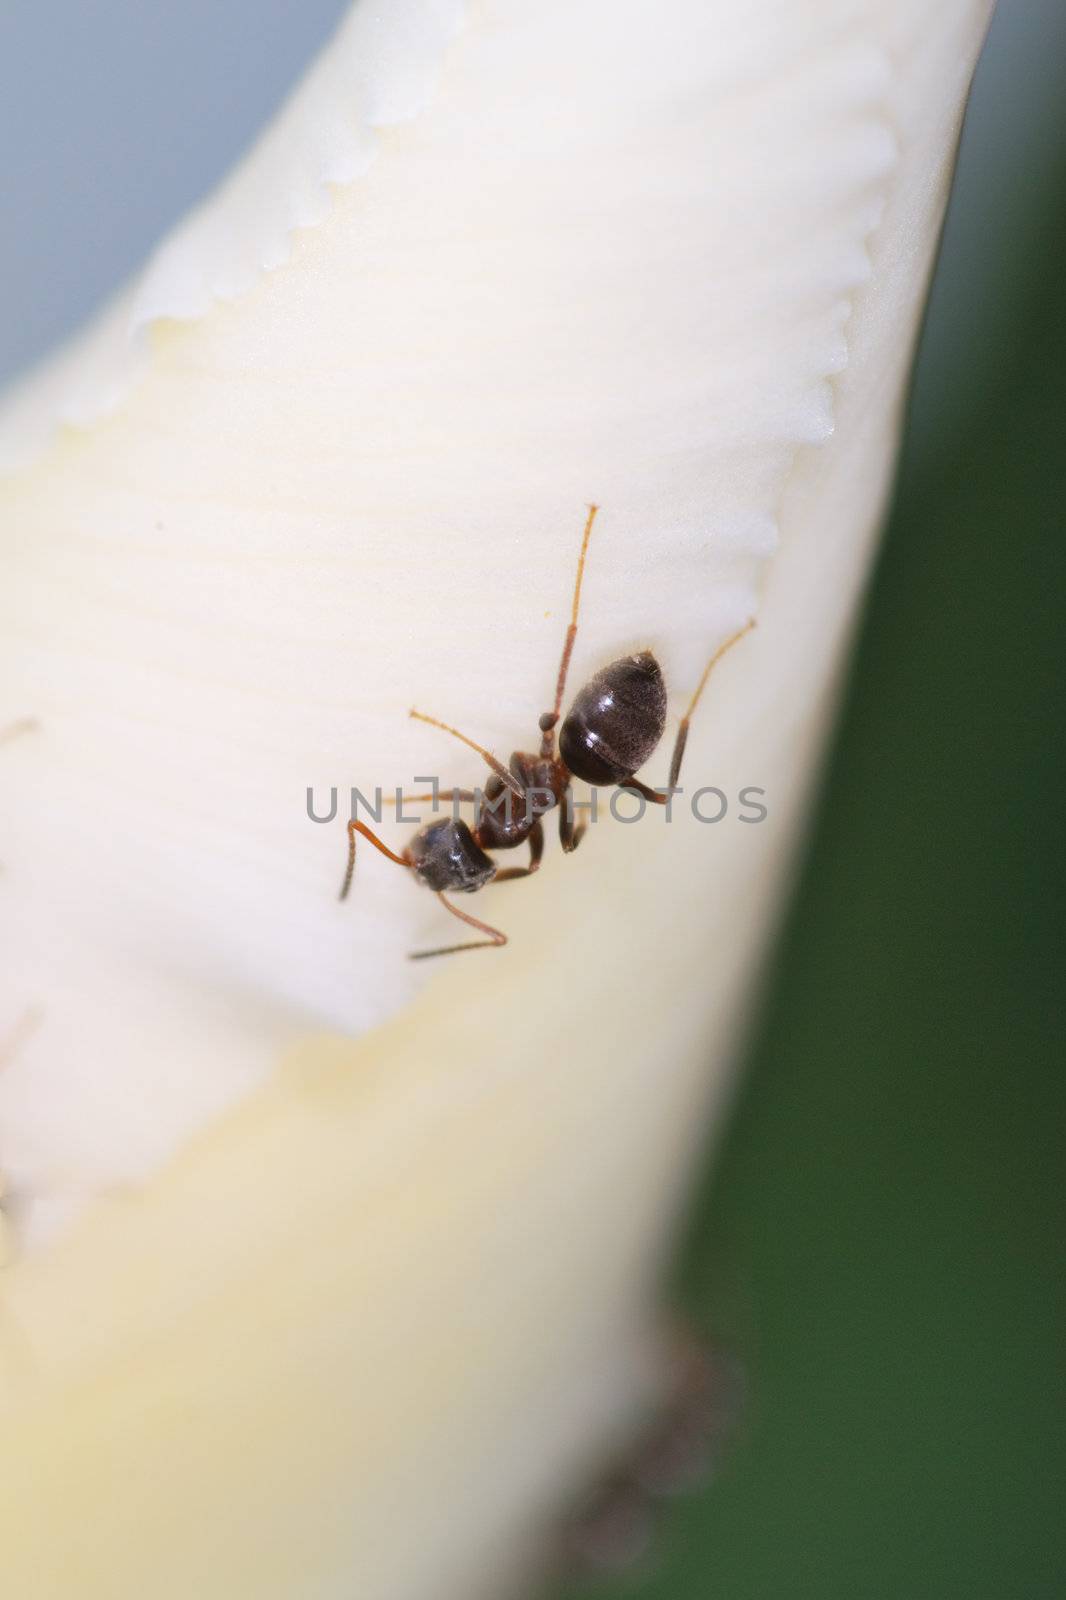  Ant on white flower by pauws99